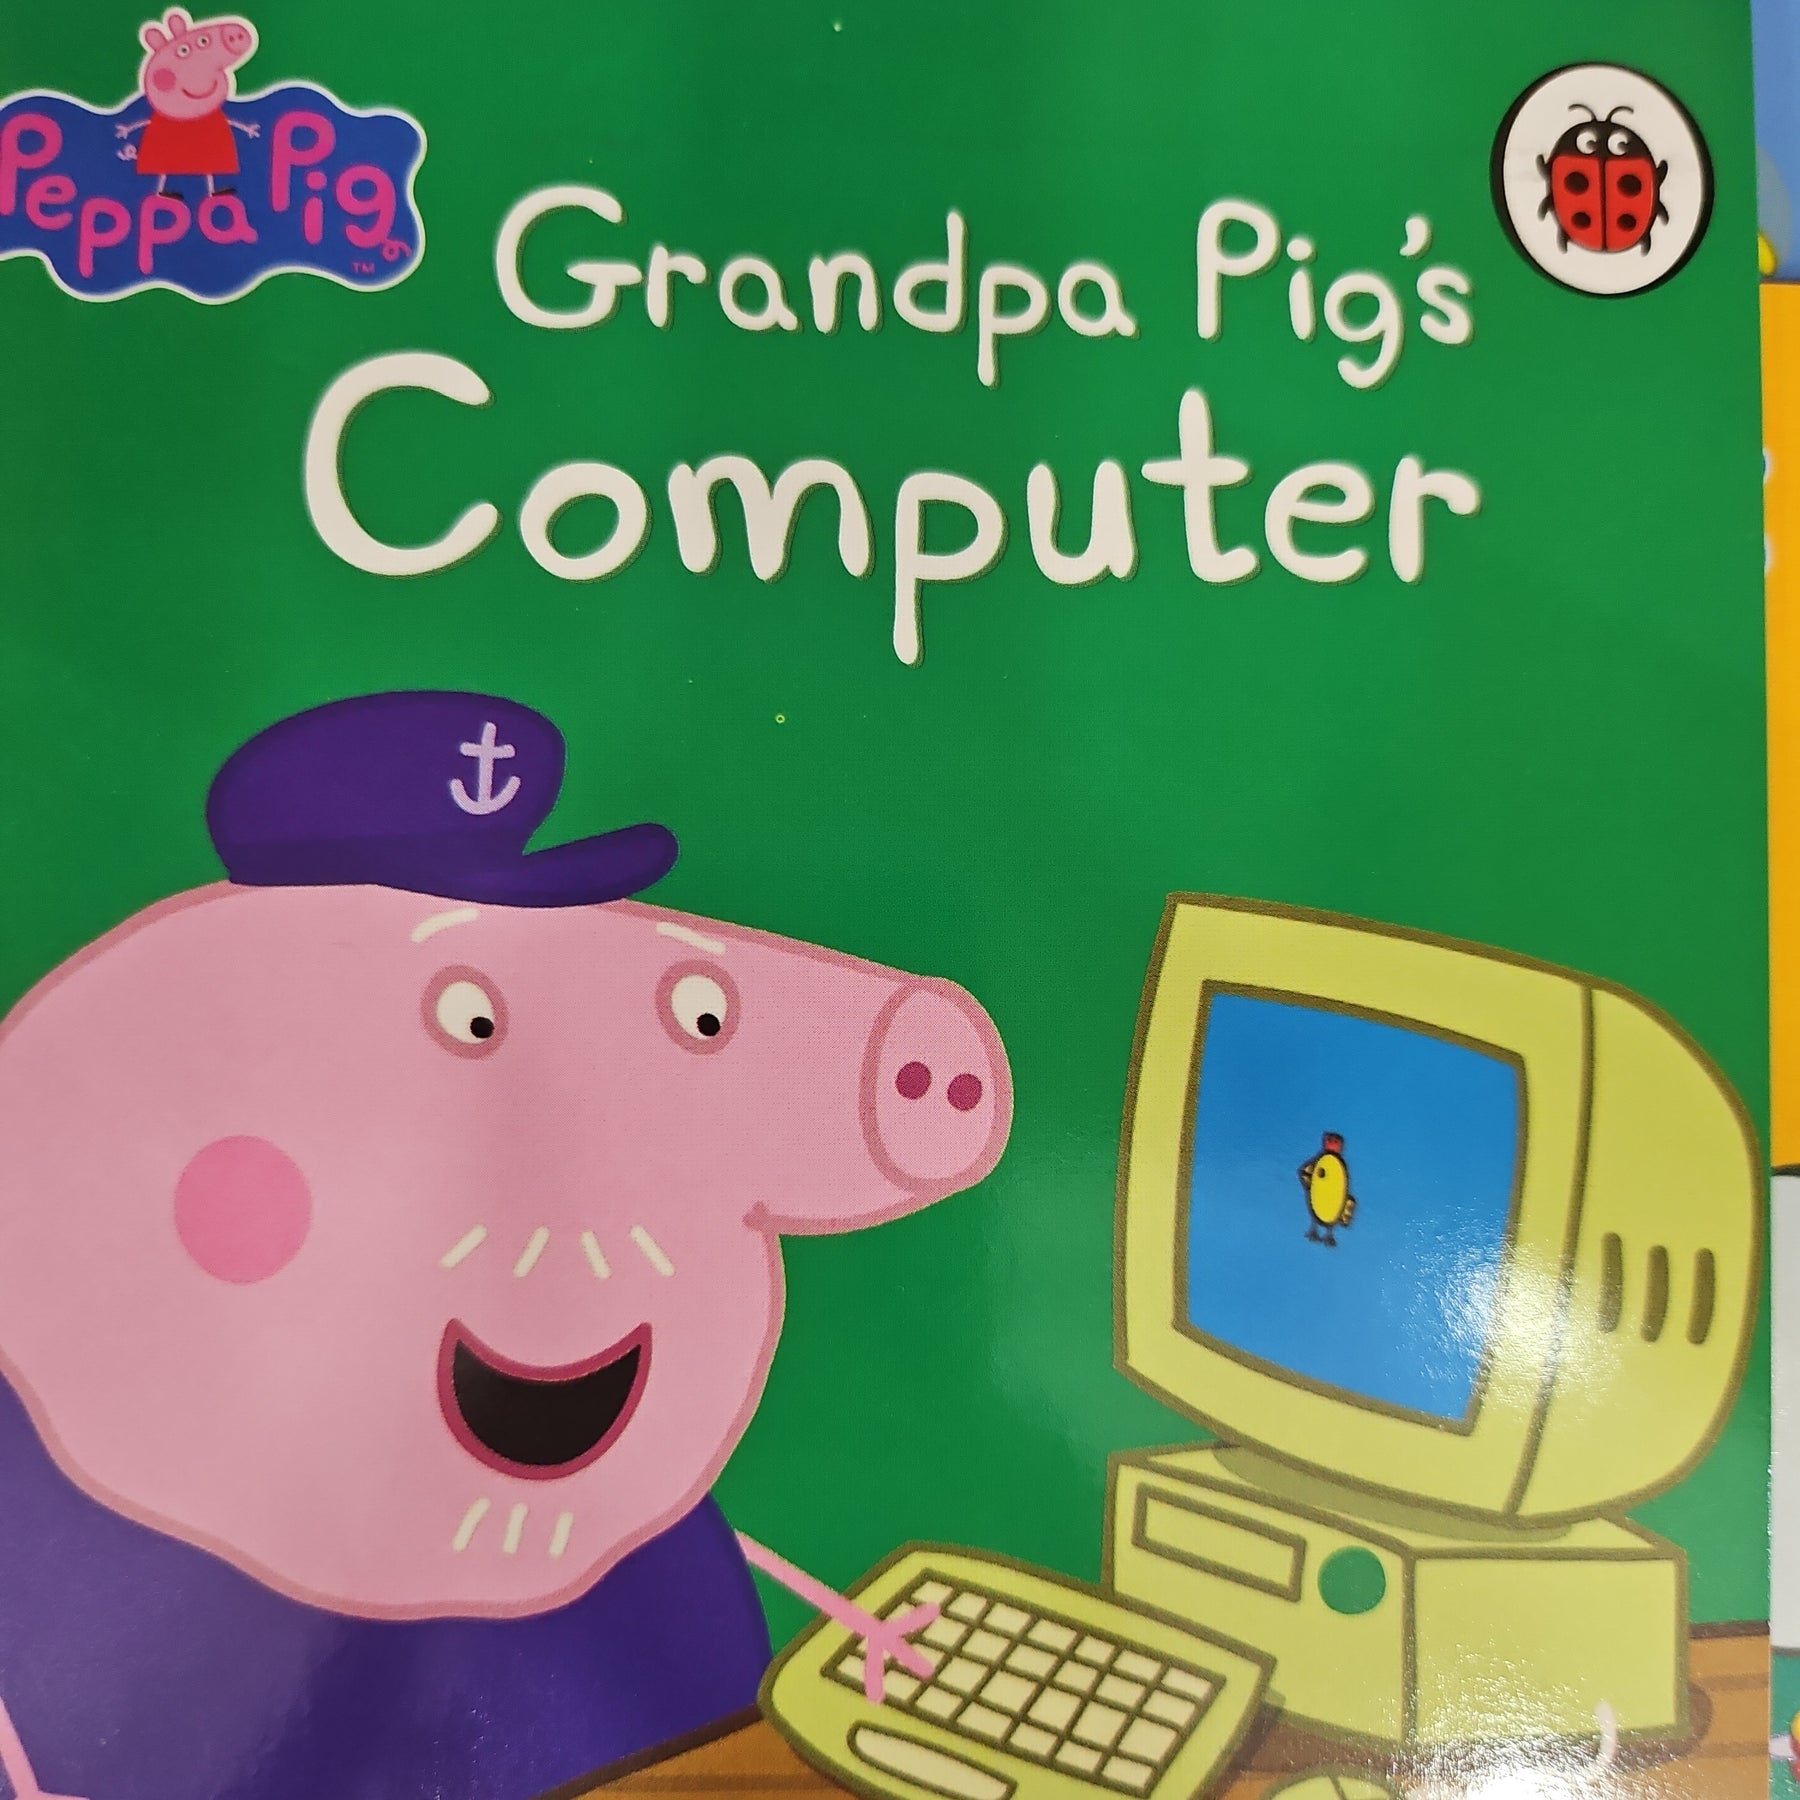 The Incredible Peppa Pig Collection:Grandpa Pig’s Computer